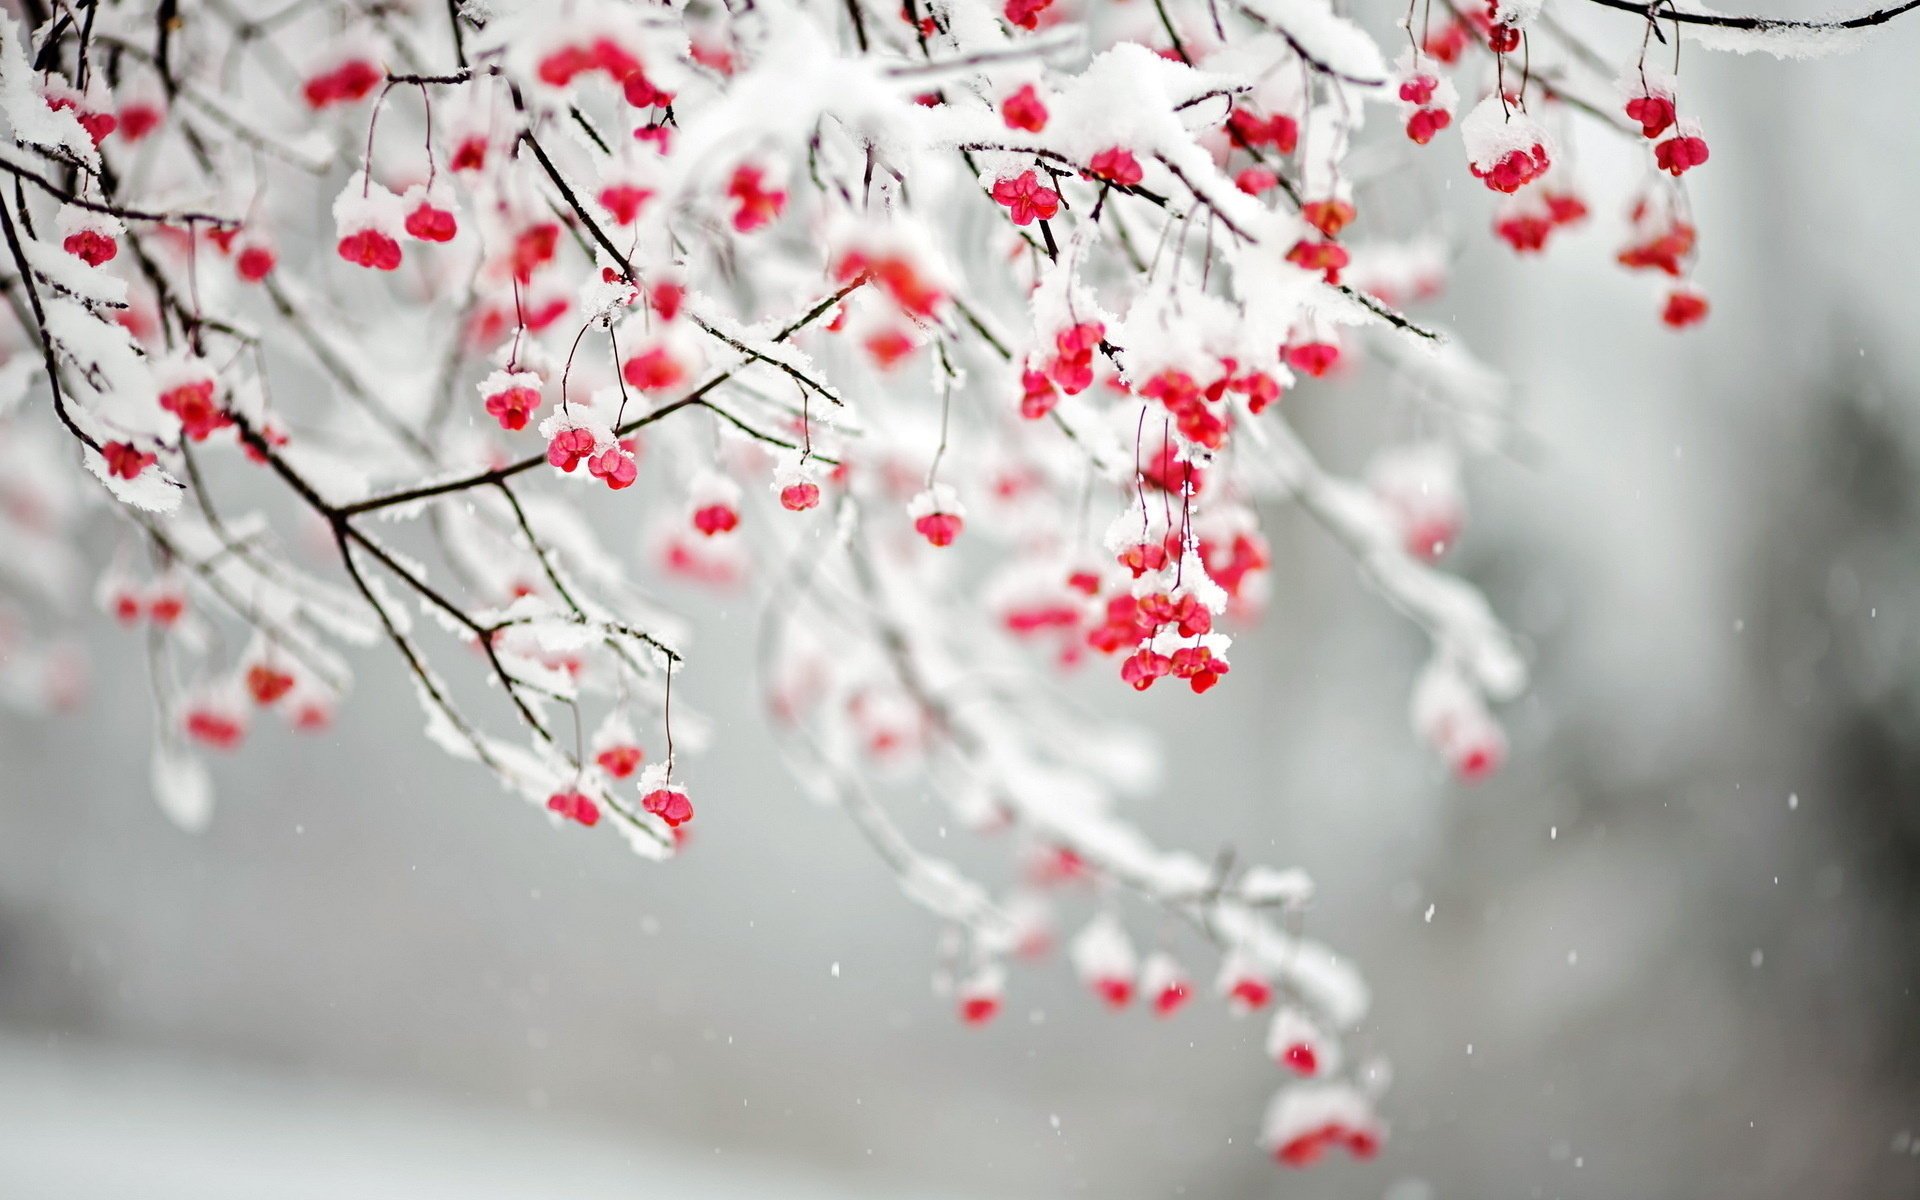 Snow-covered branches with red berries, snow, nature